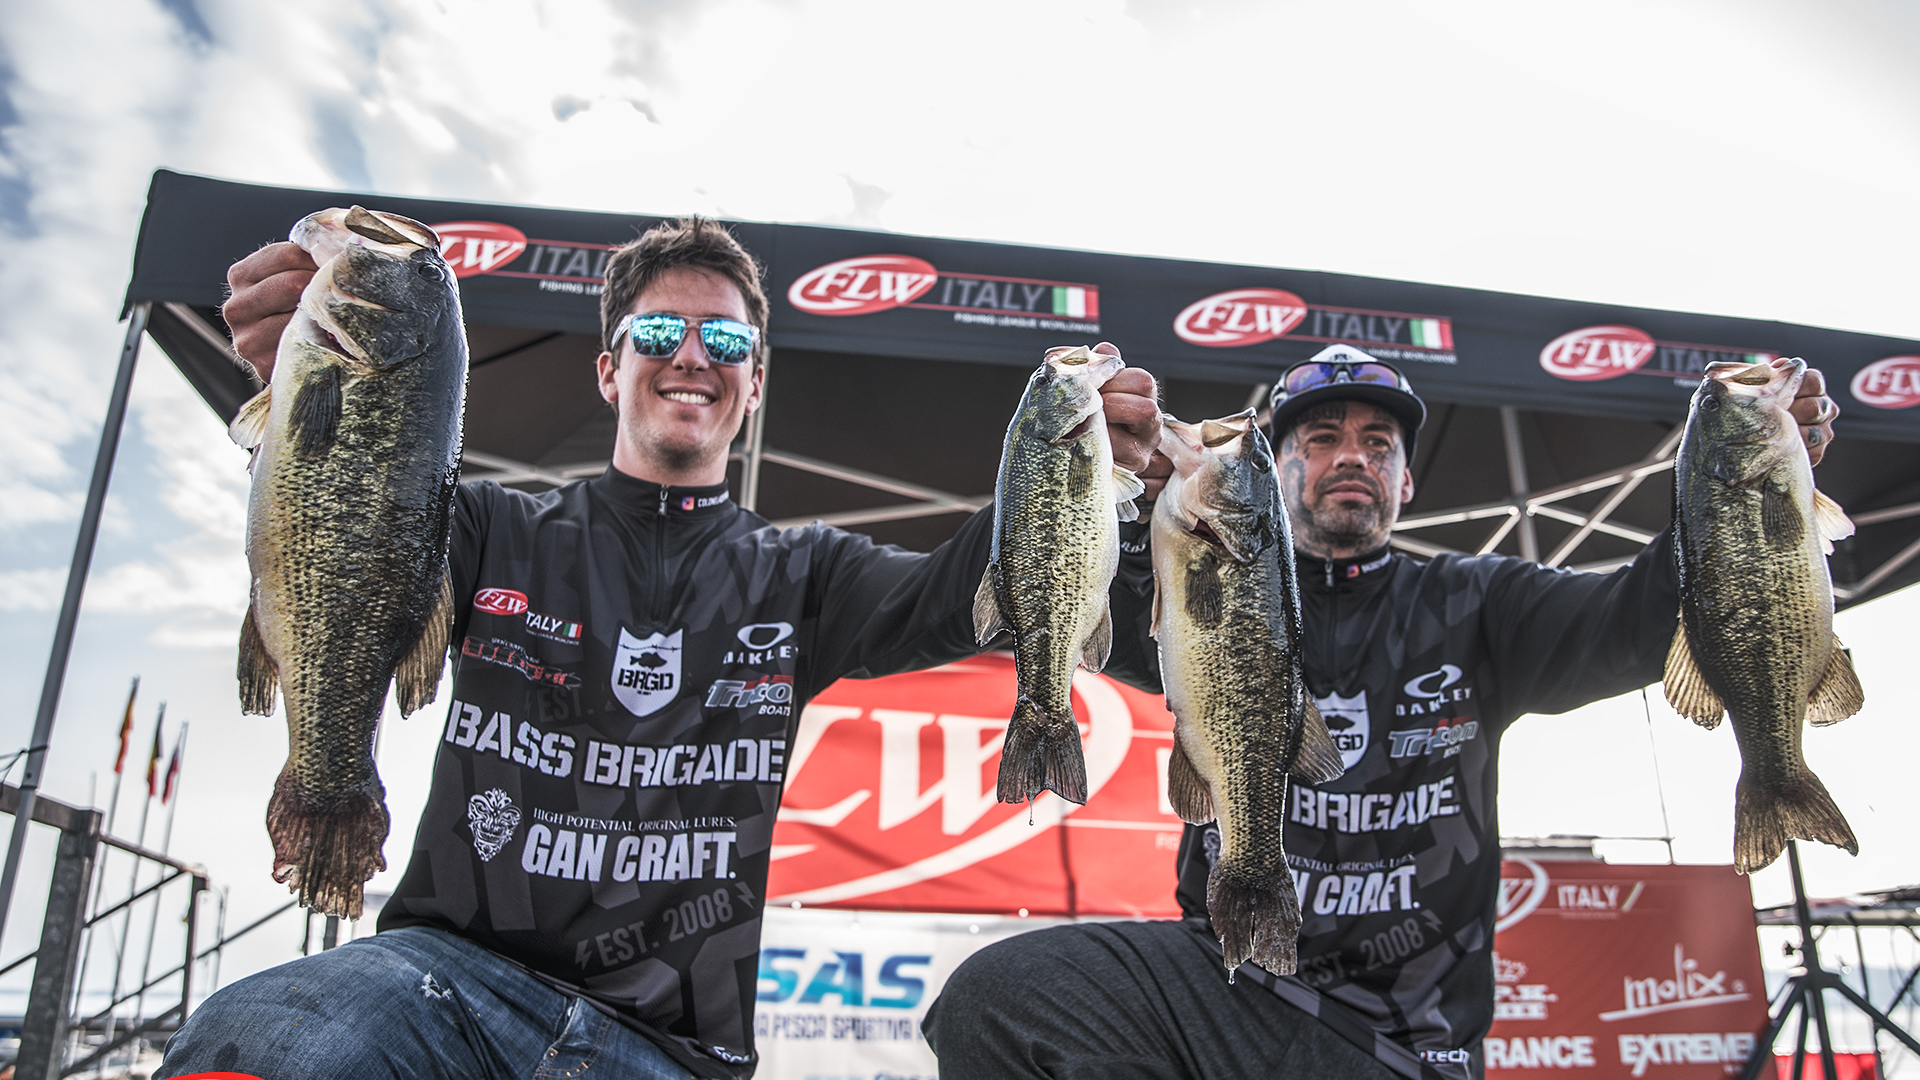 FLW Italy Starting Strong - Major League Fishing